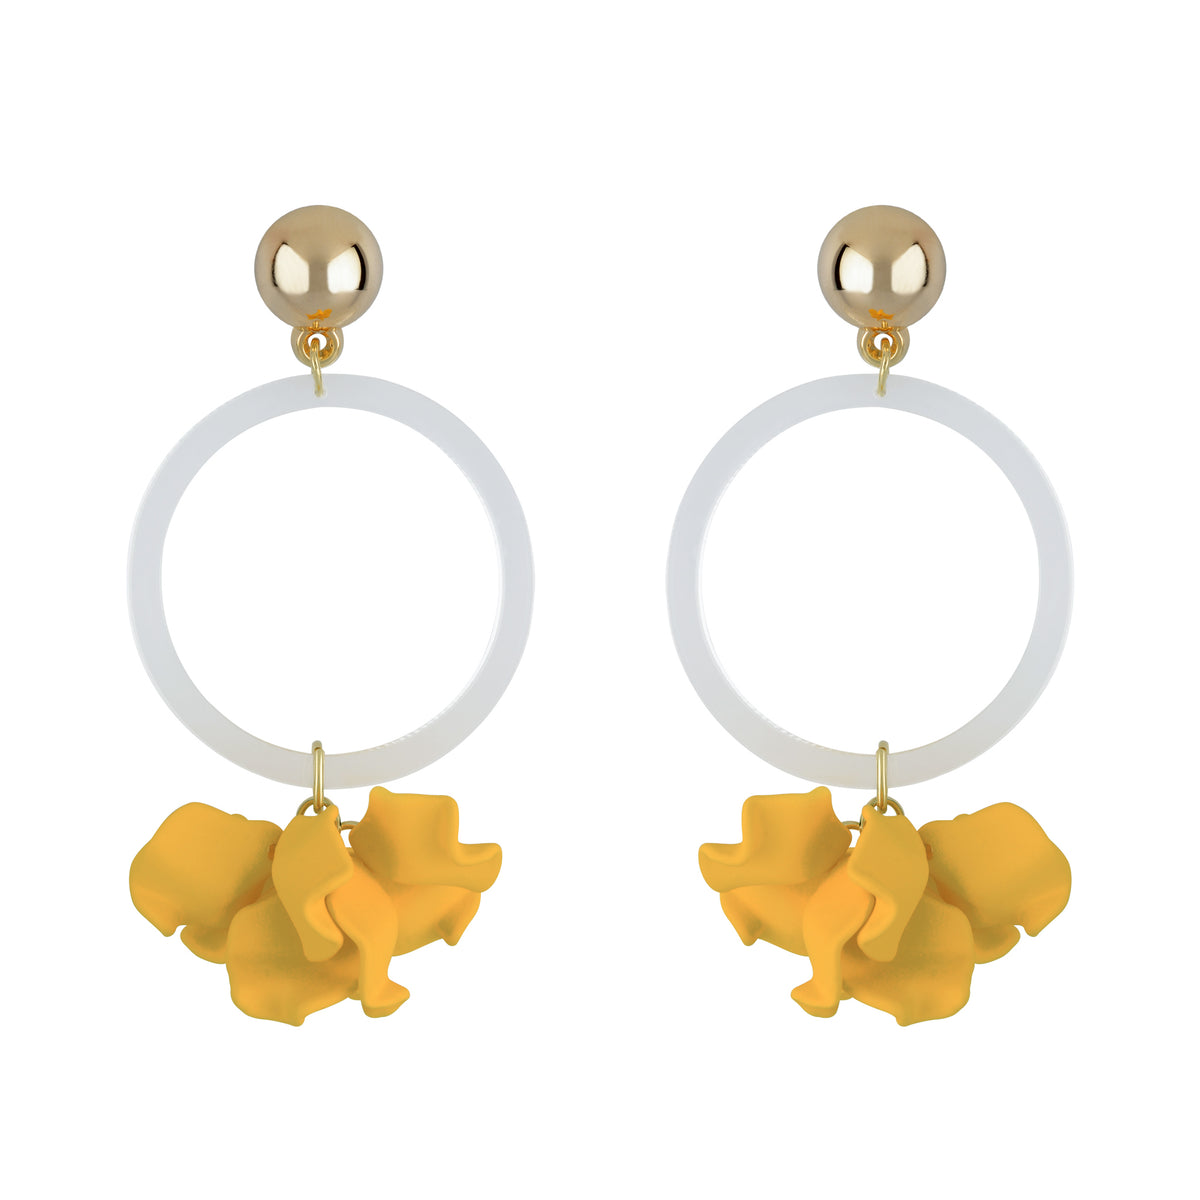 Suspended Clear Ring Petal Earrings - Yellow